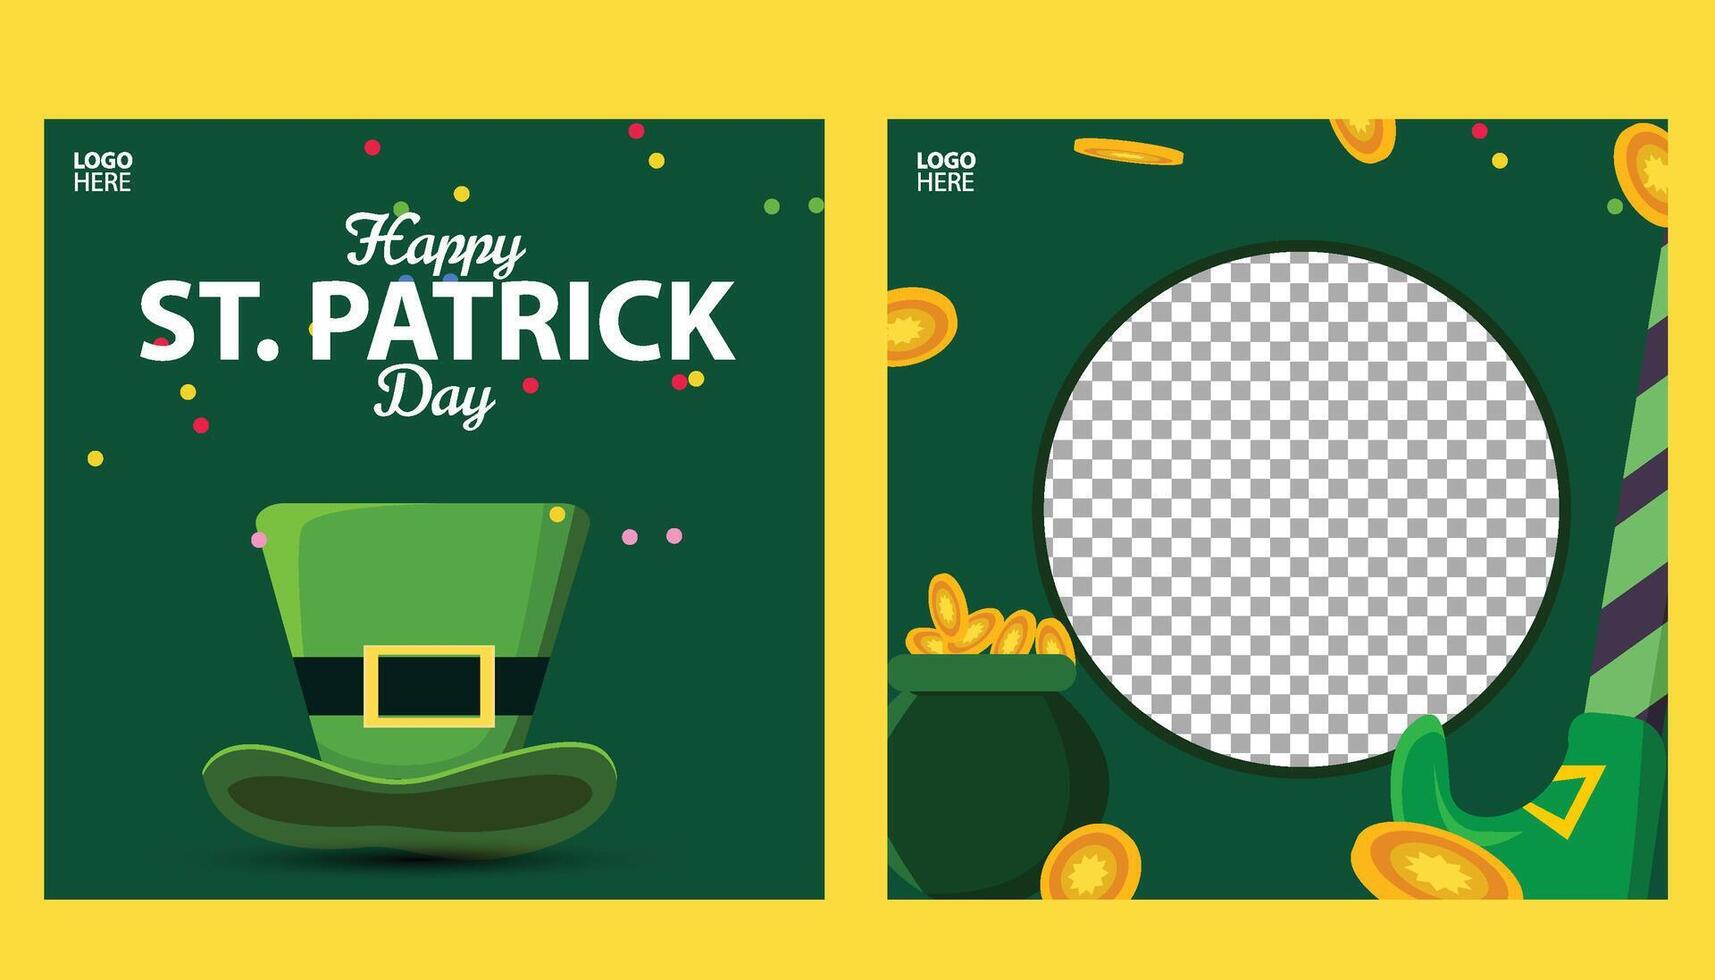 St. Patrick's Day holiday square template and design elements green shamrocks, beer drinks and celebration decorations for banners, posters and social media posts. vector